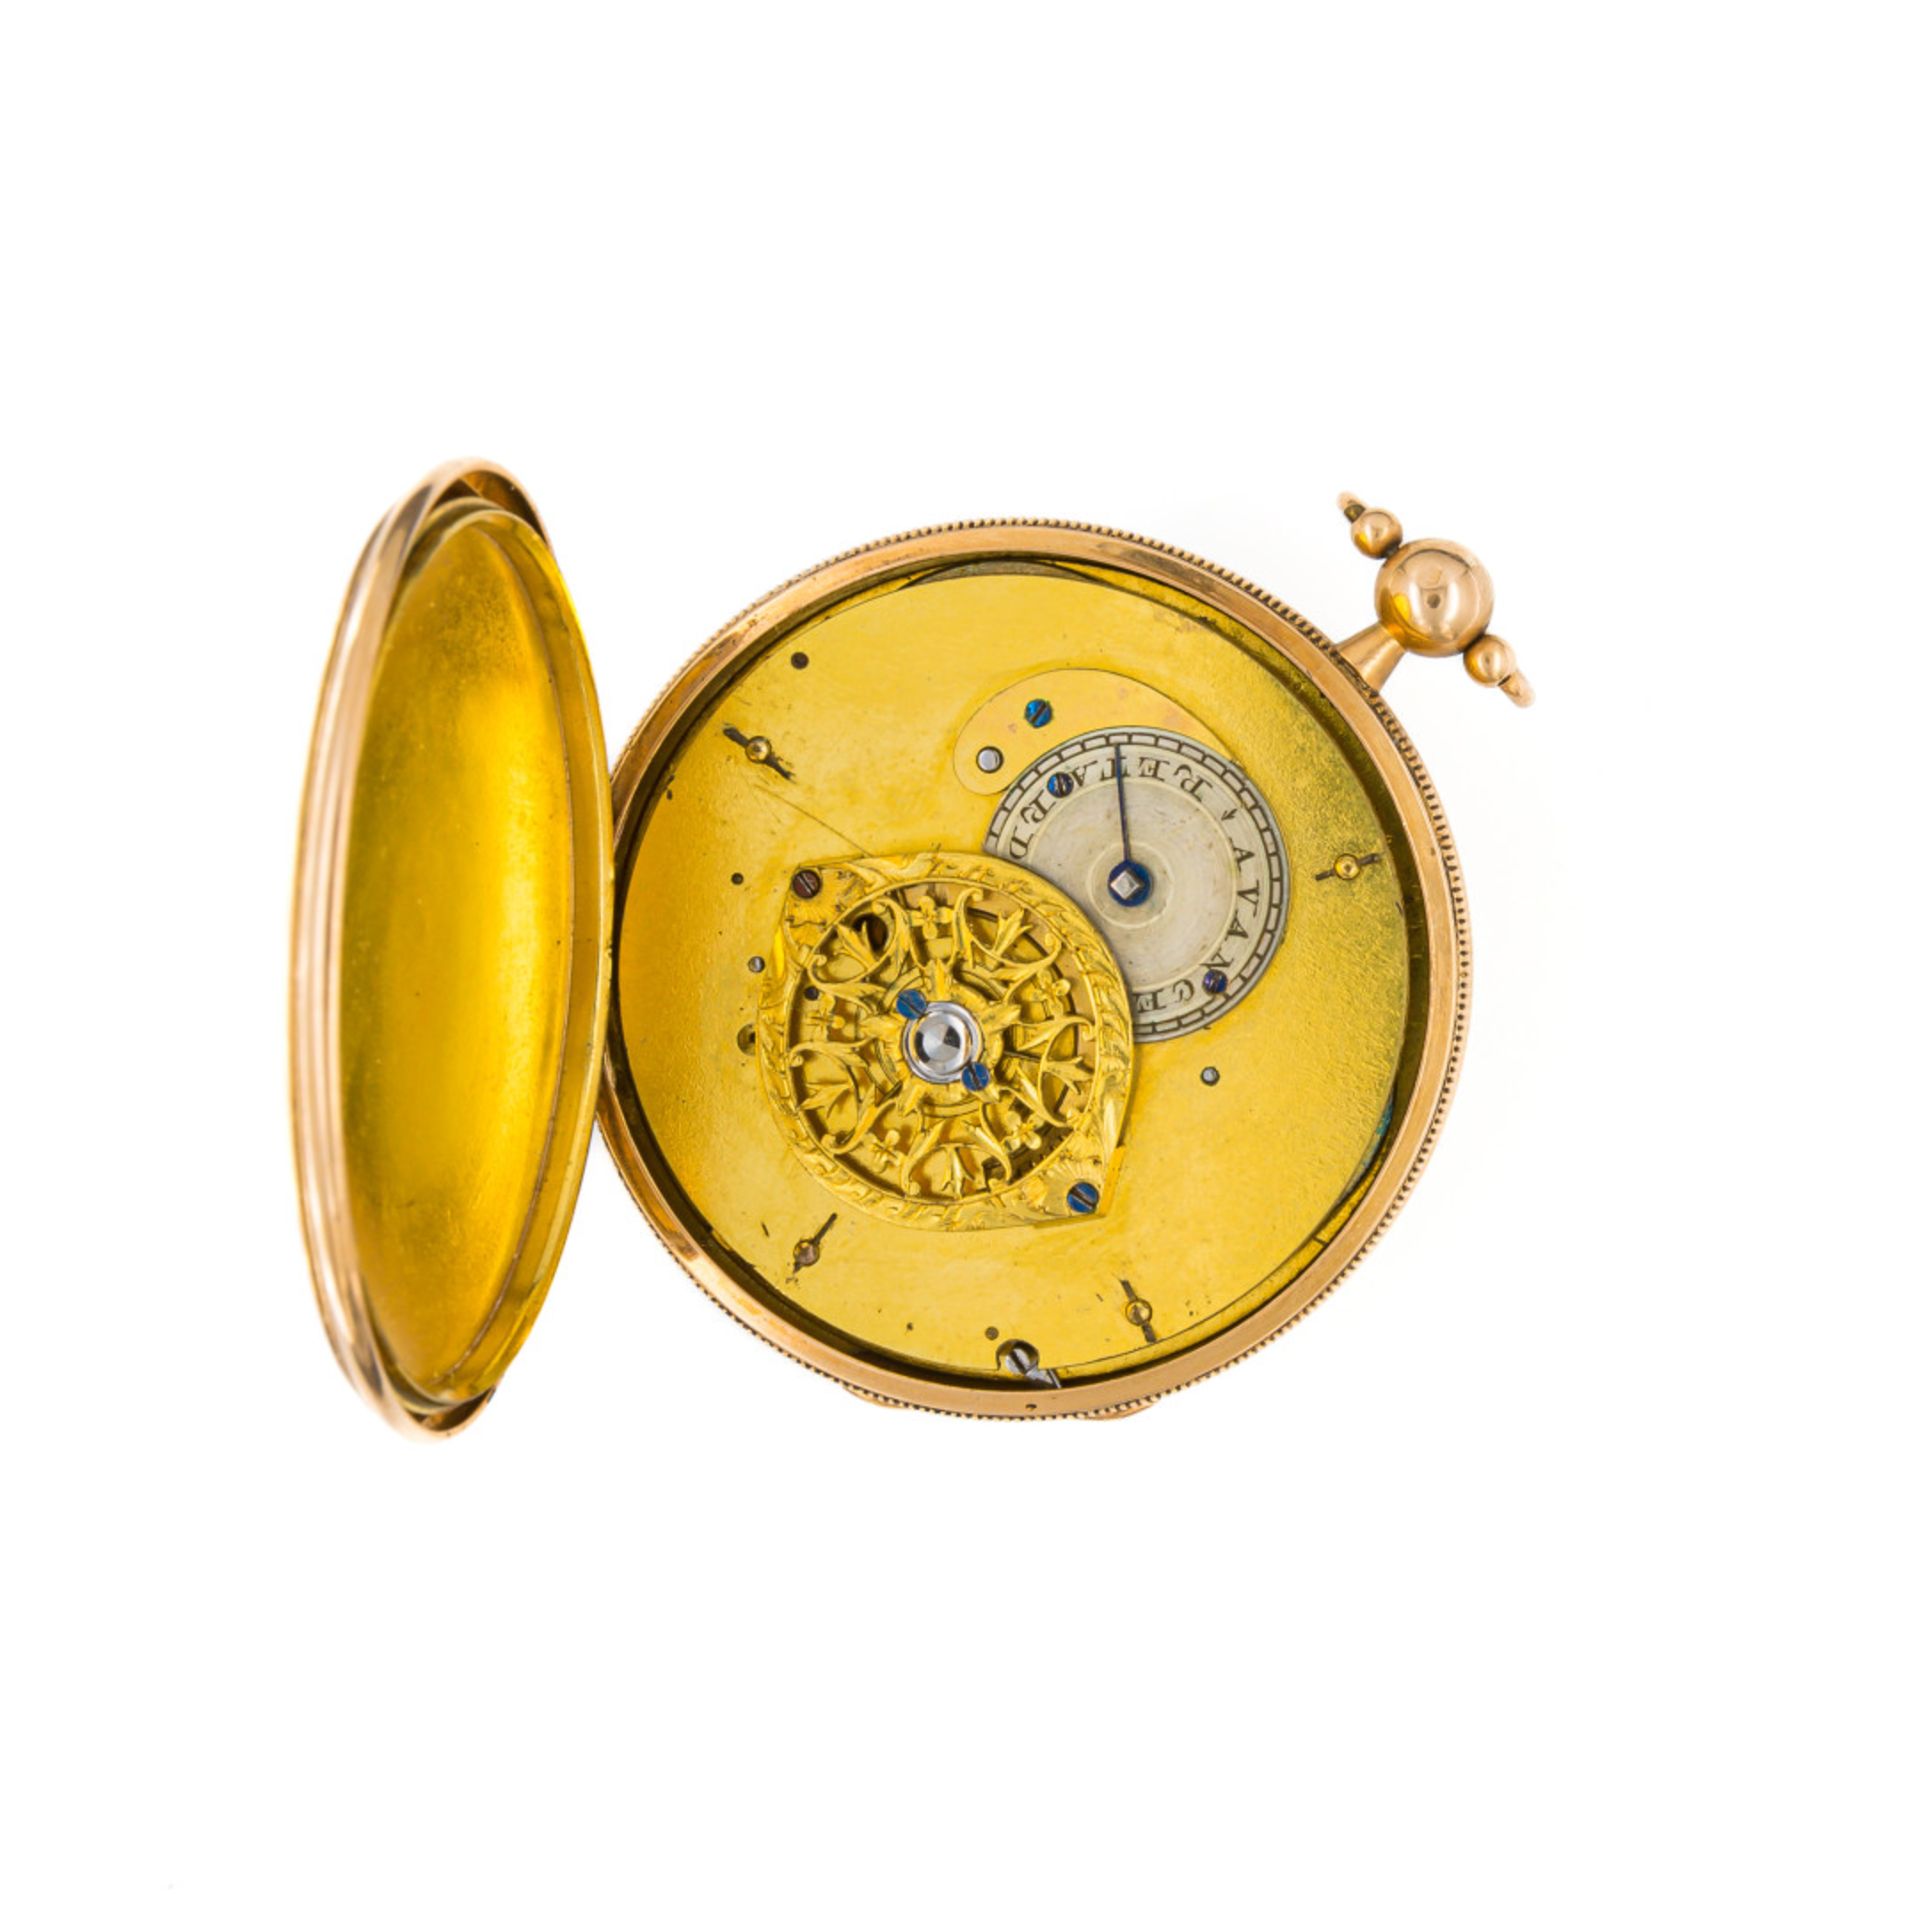 WATCH IN GOLD, CIRCA 1800 - WATCH IN GOLD, CIRCA 1800 Case: n. 78983, four-body in gold, engine - Image 2 of 4